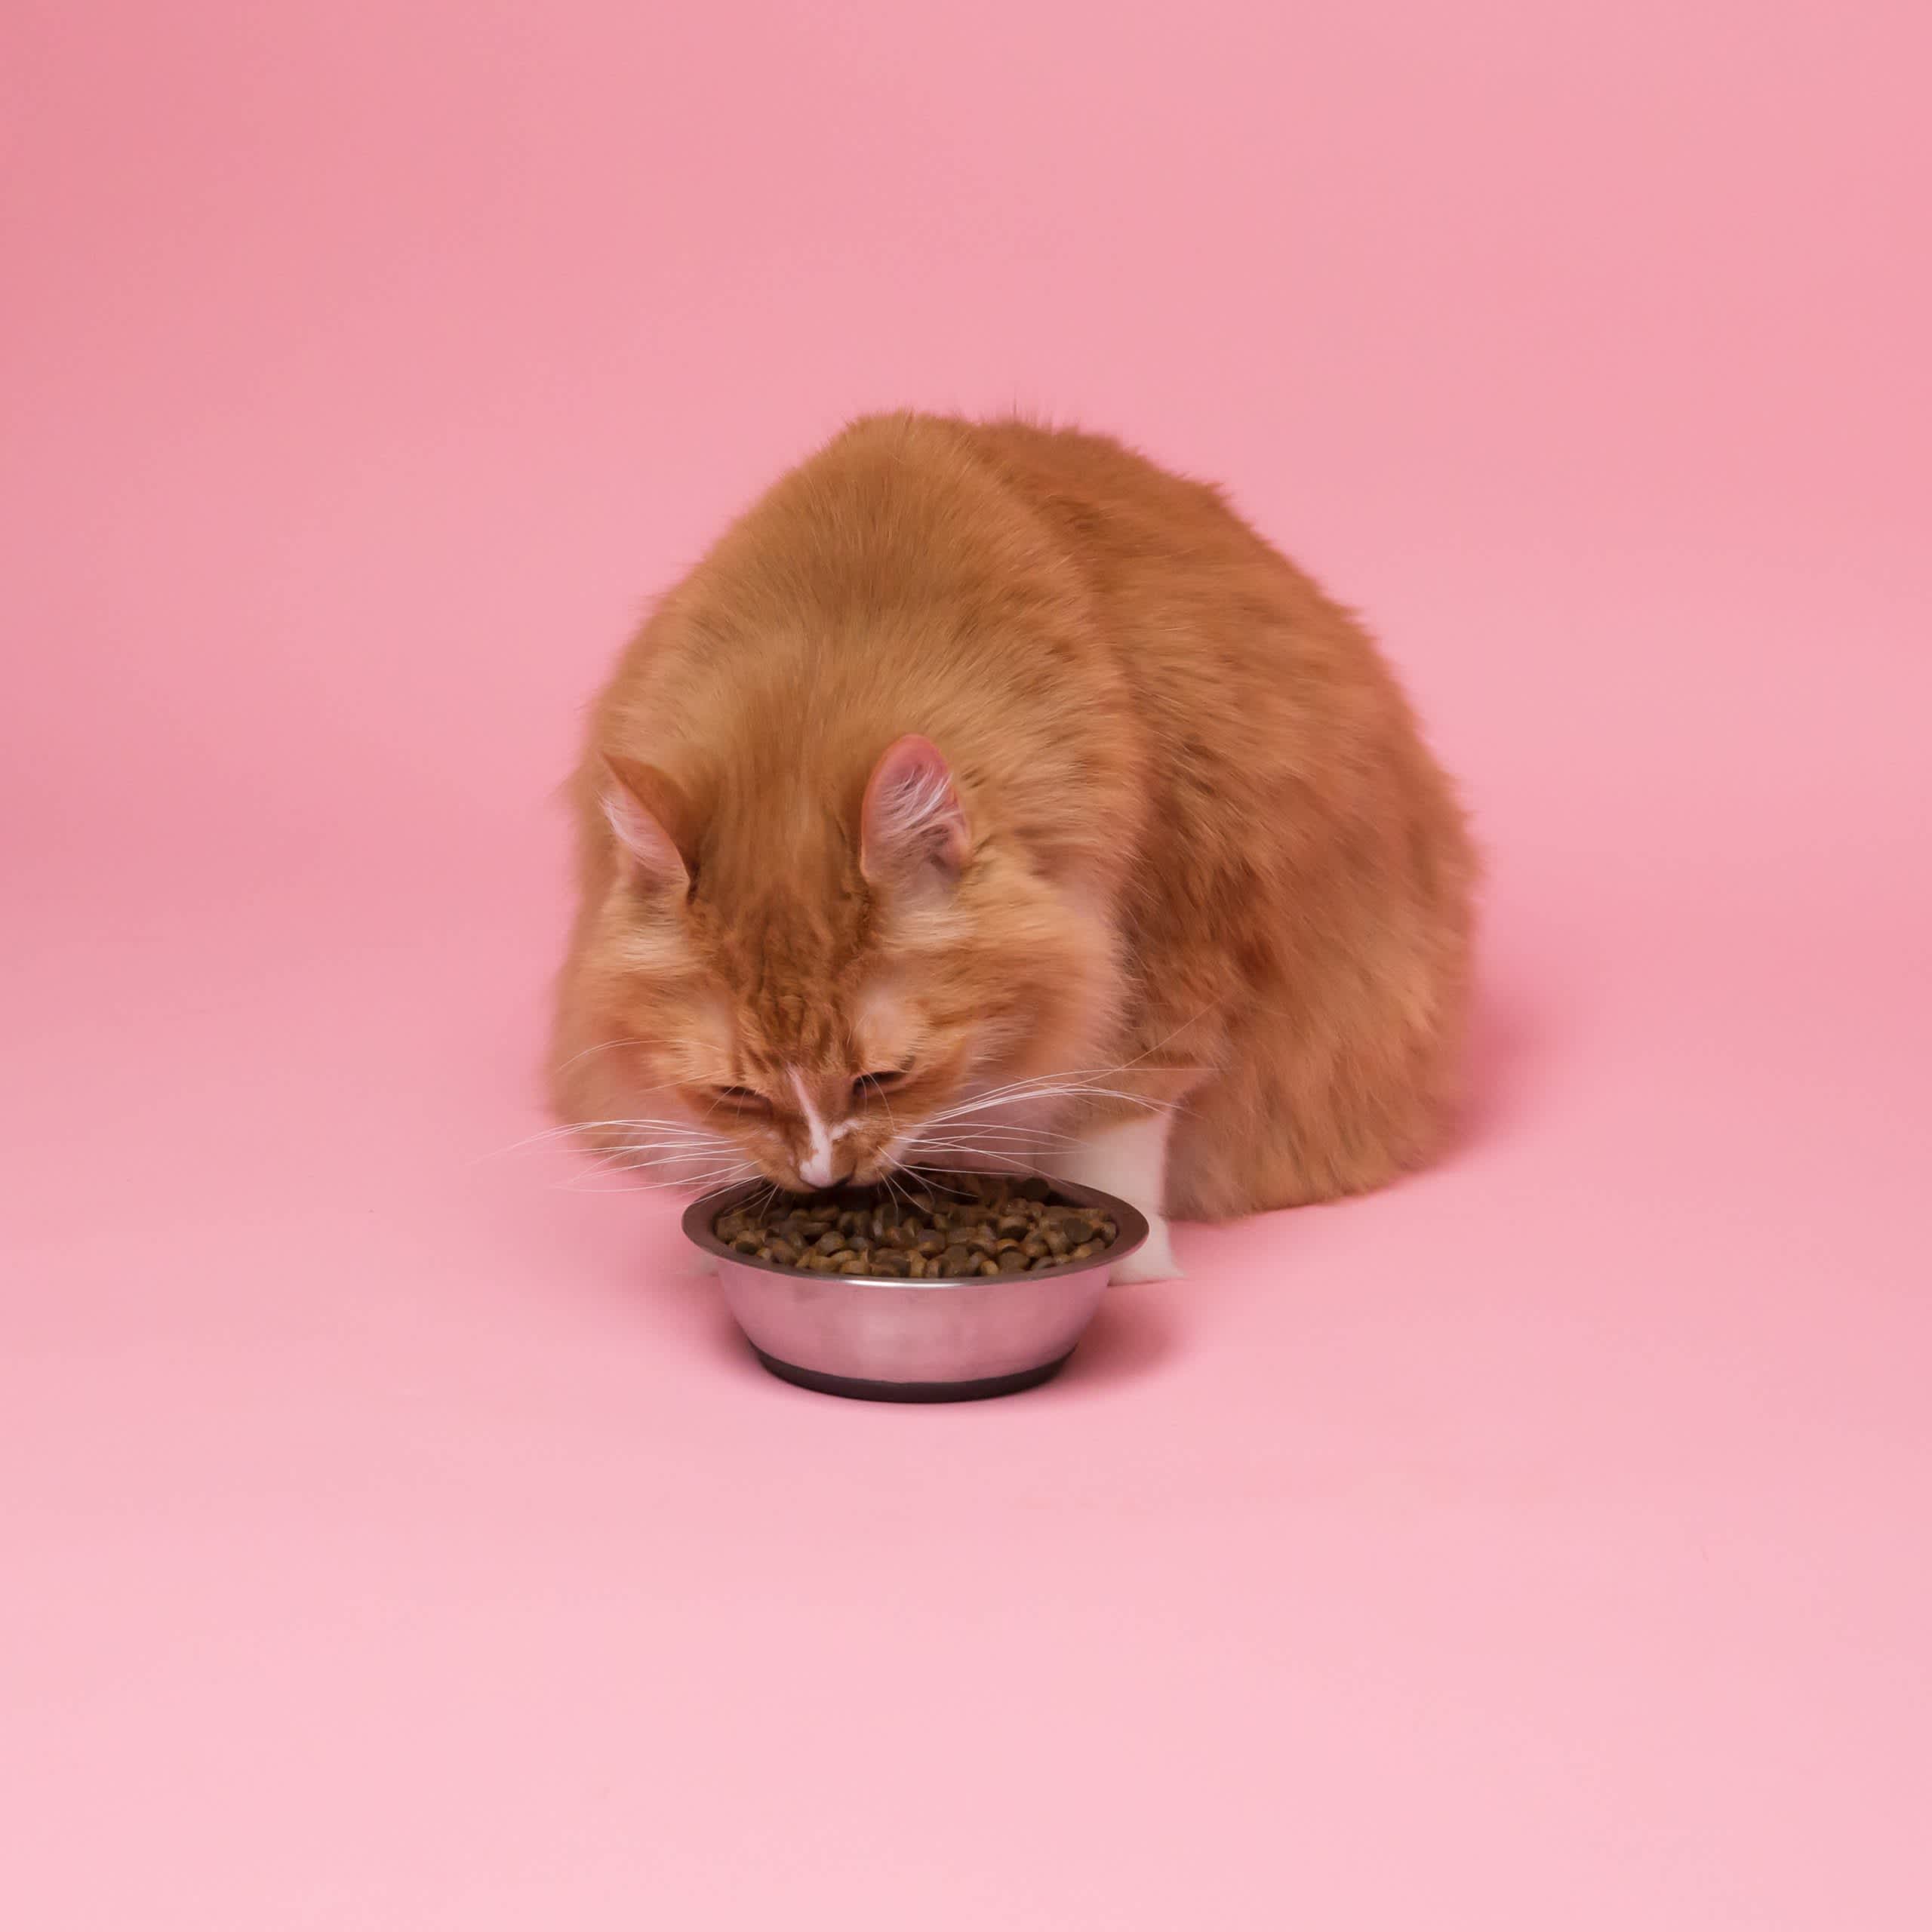 Adult cat eating a bowl of food